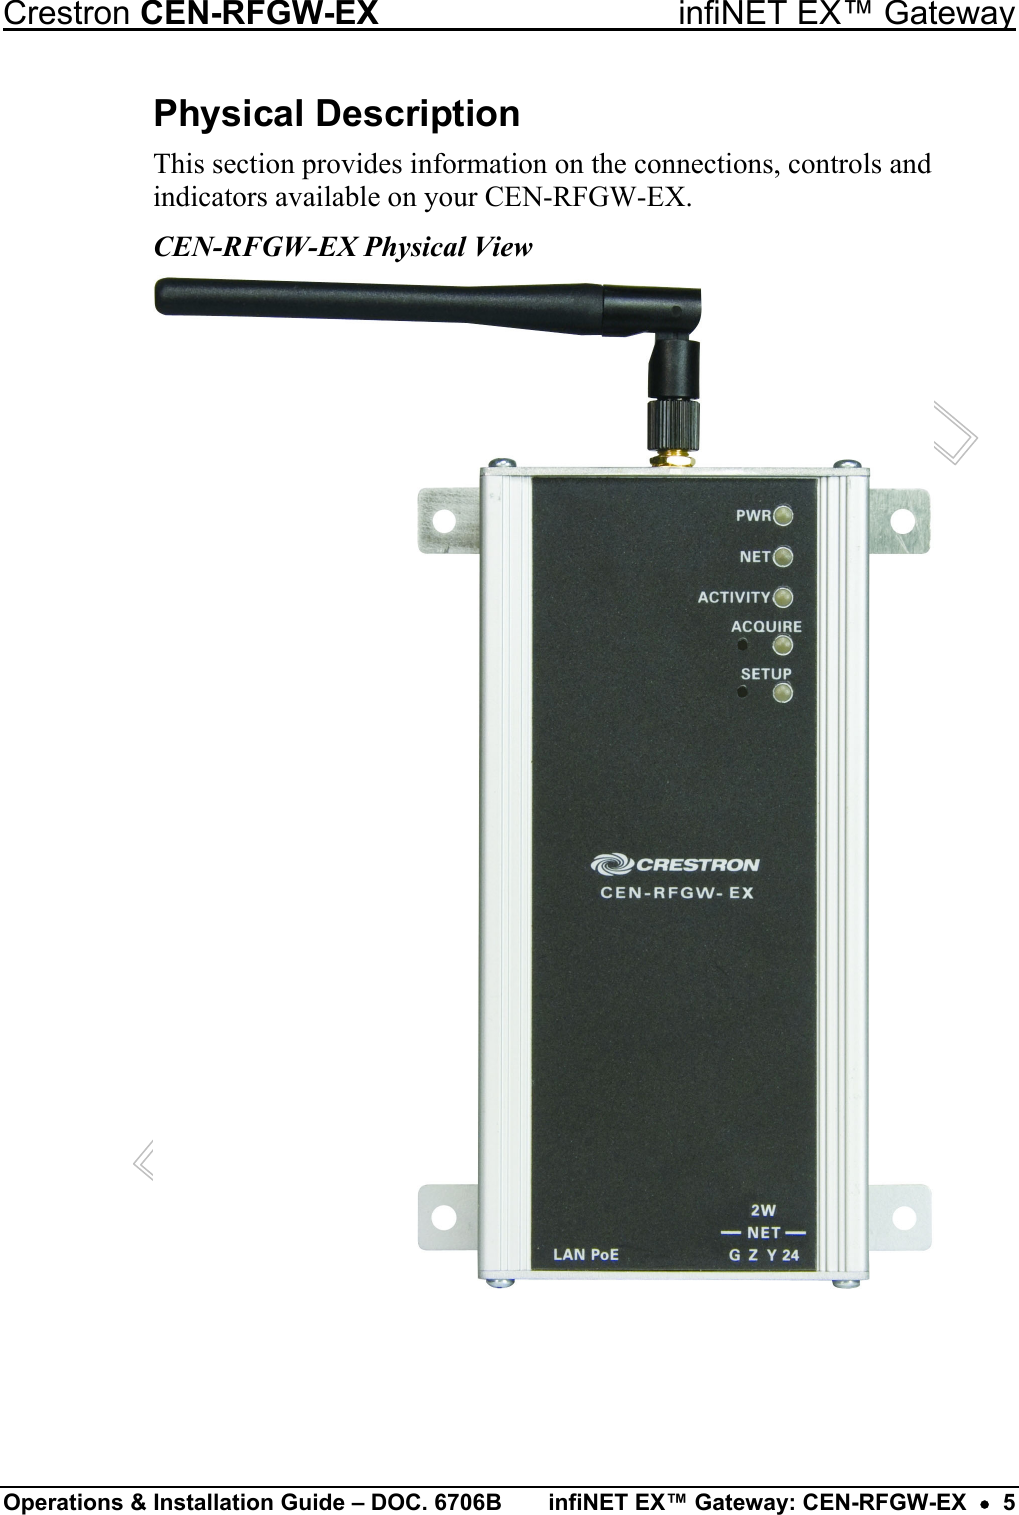 Crestron CEN-RFGW-EX  infiNET EX™ Gateway  Operations &amp; Installation Guide – DOC. 6706B  infiNET EX™ Gateway: CEN-RFGW-EX  •  5 Physical Description This section provides information on the connections, controls and indicators available on your CEN-RFGW-EX. CEN-RFGW-EX Physical View  